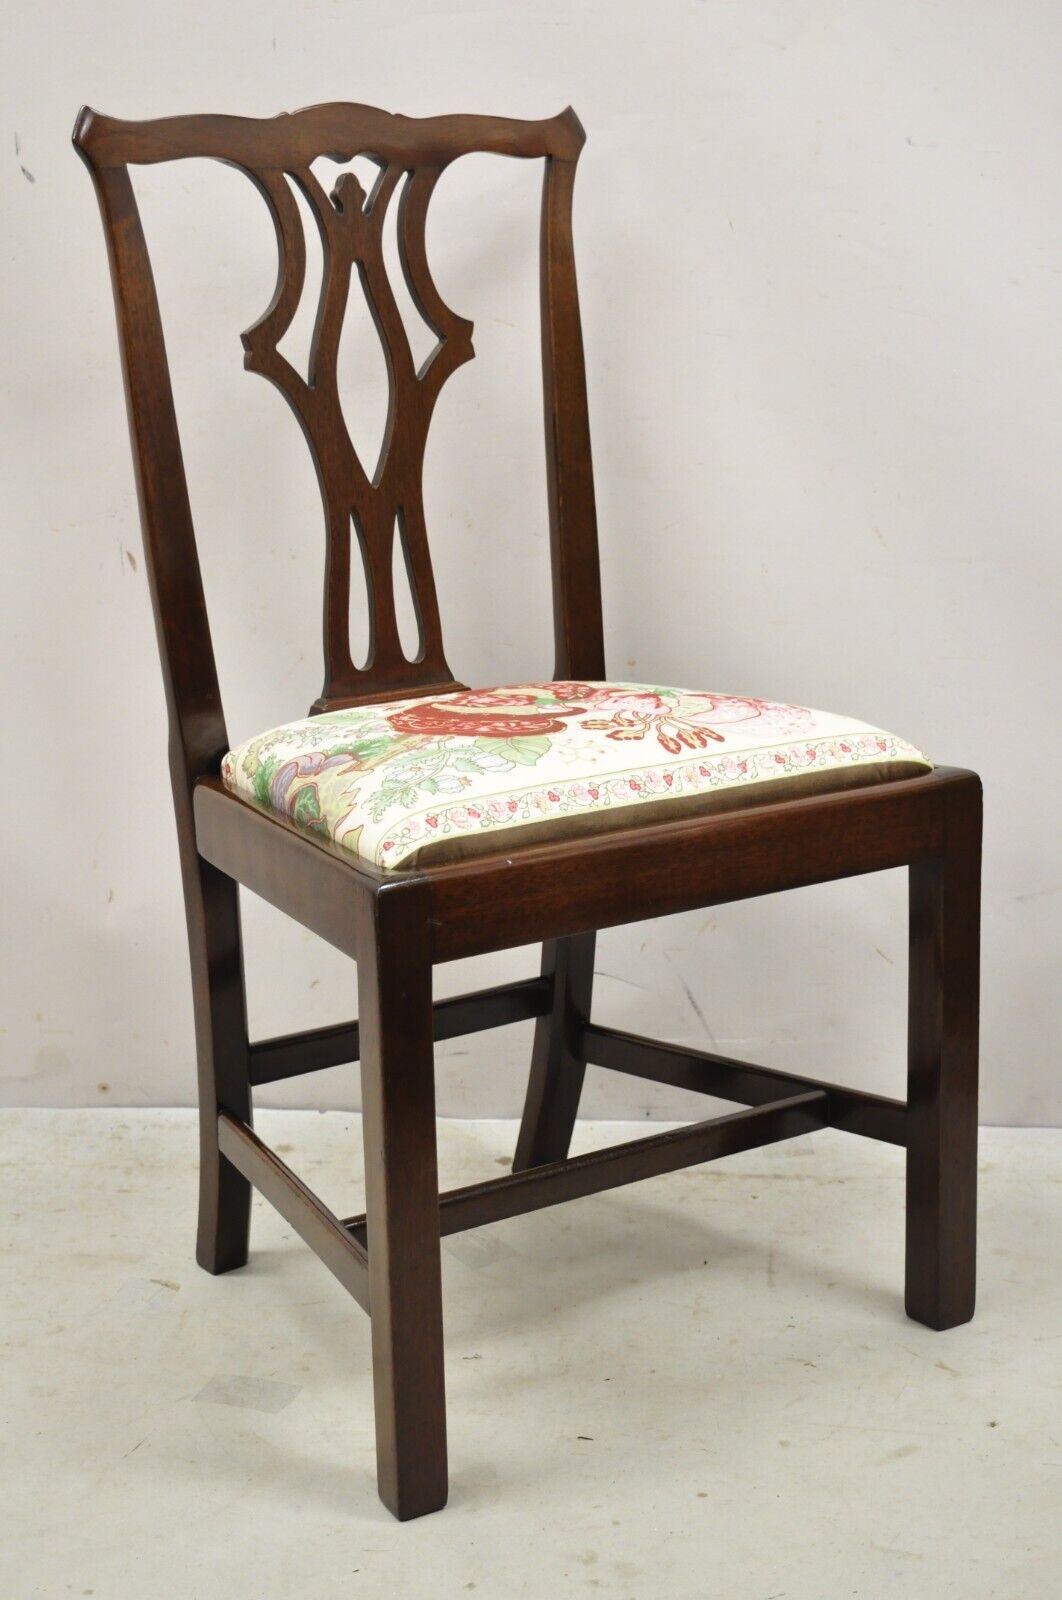 Vintage Chippendale Georgian style solid mahogany dining side chairs - set of 4. Item features (4) Side chairs, solid wood construction, beautiful wood grain, very nice vintage set, quality American craftsmanship, great style and form. Circa Mid